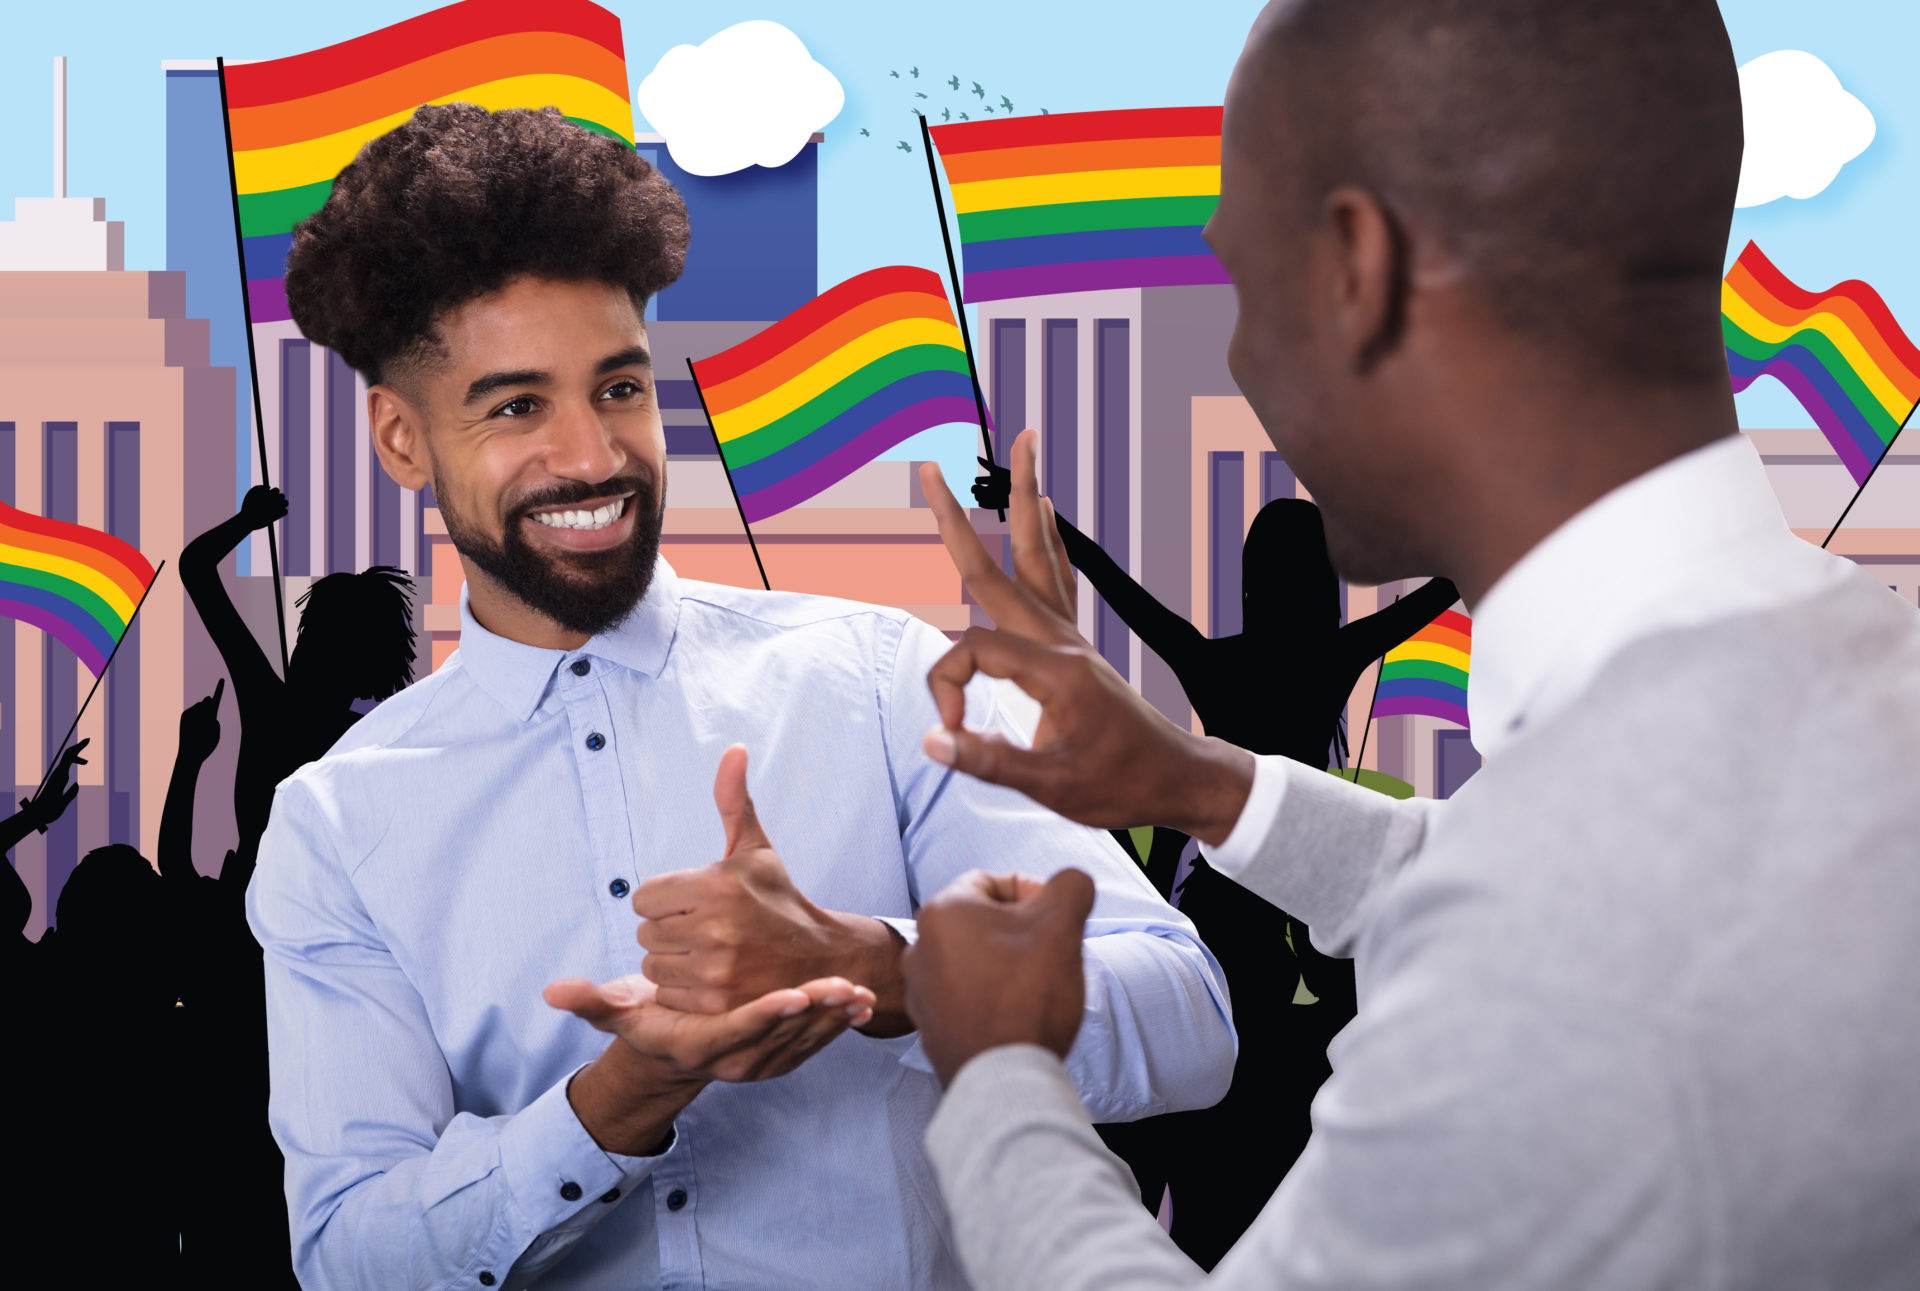 Two people signing to each other and smiling. One is signing 'support' and one is signing 'OK'. Behind them is a street scene with people waving rainbow flags for Pride and accessibility.